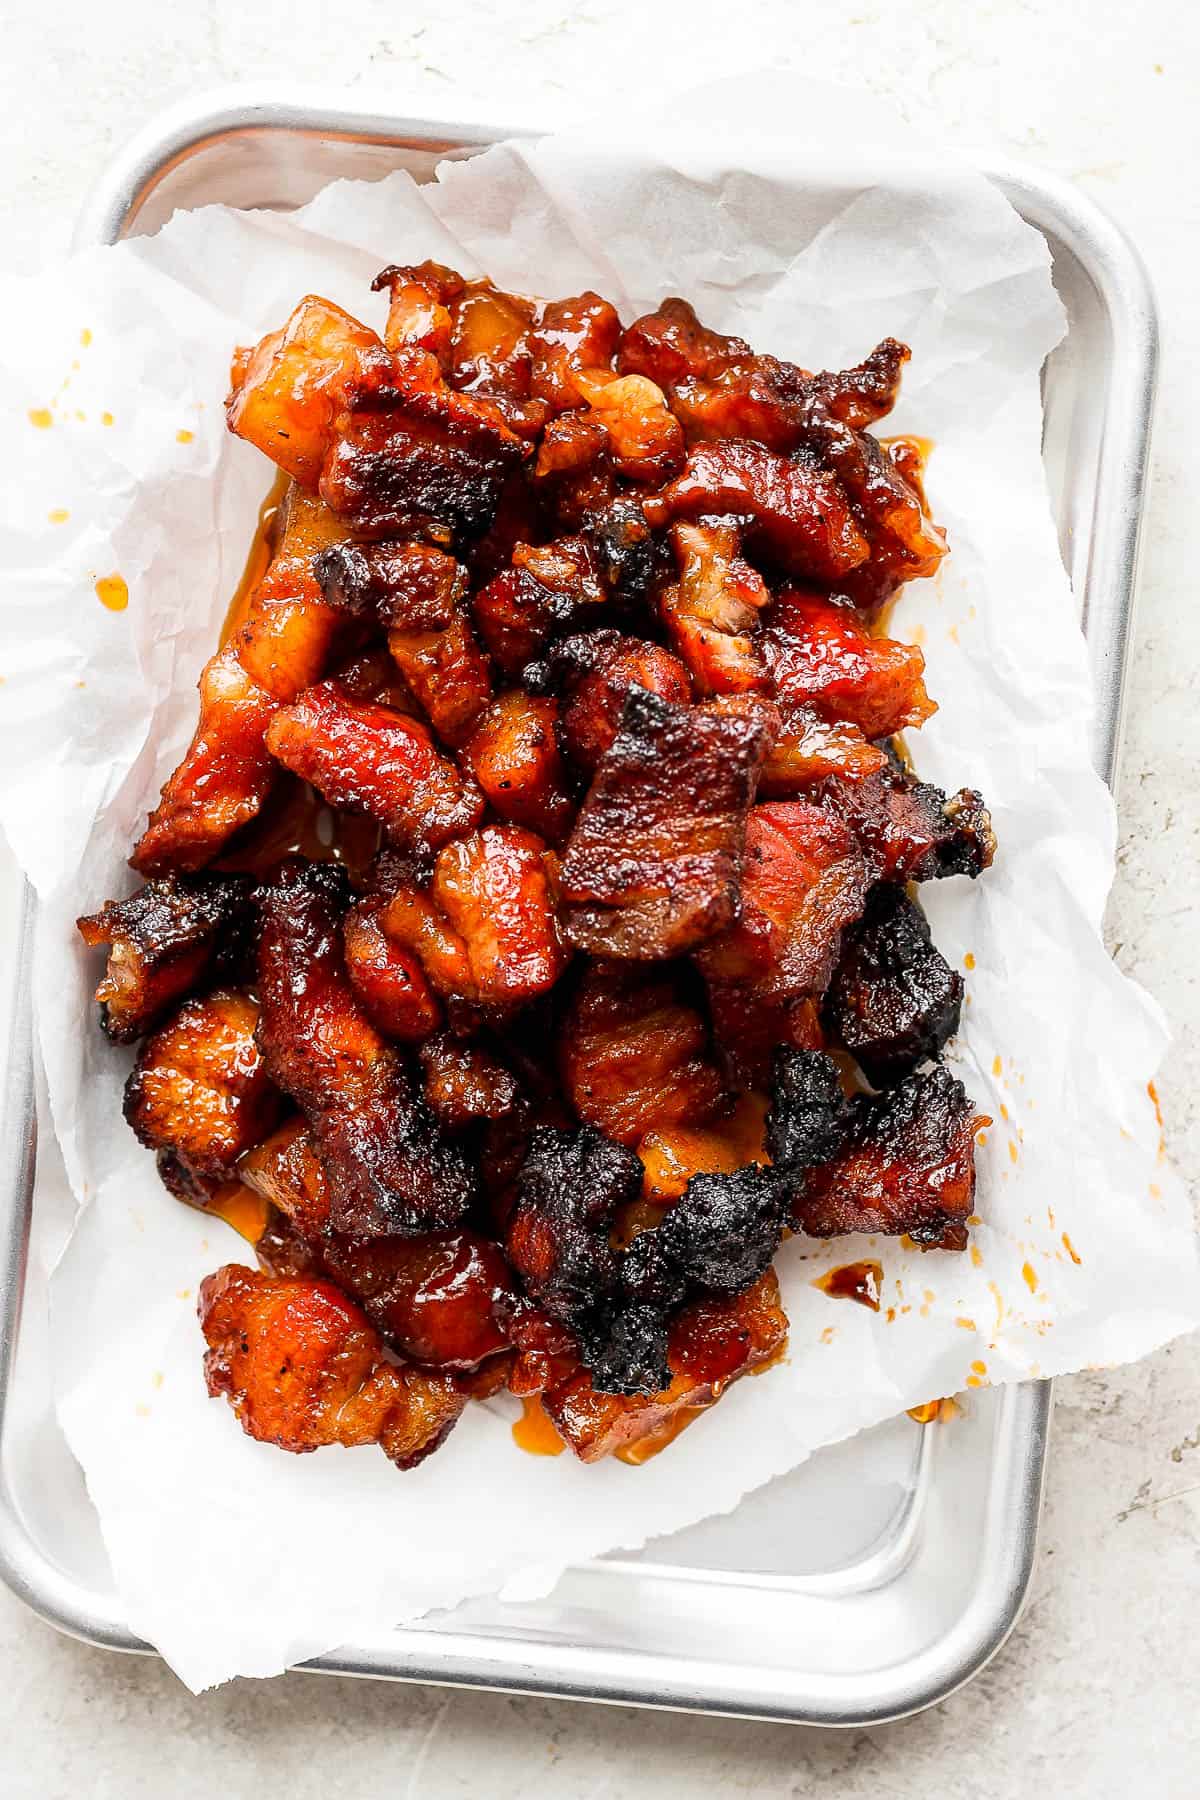 Pork belly burnt ends on parchment paper on a tray for serving.